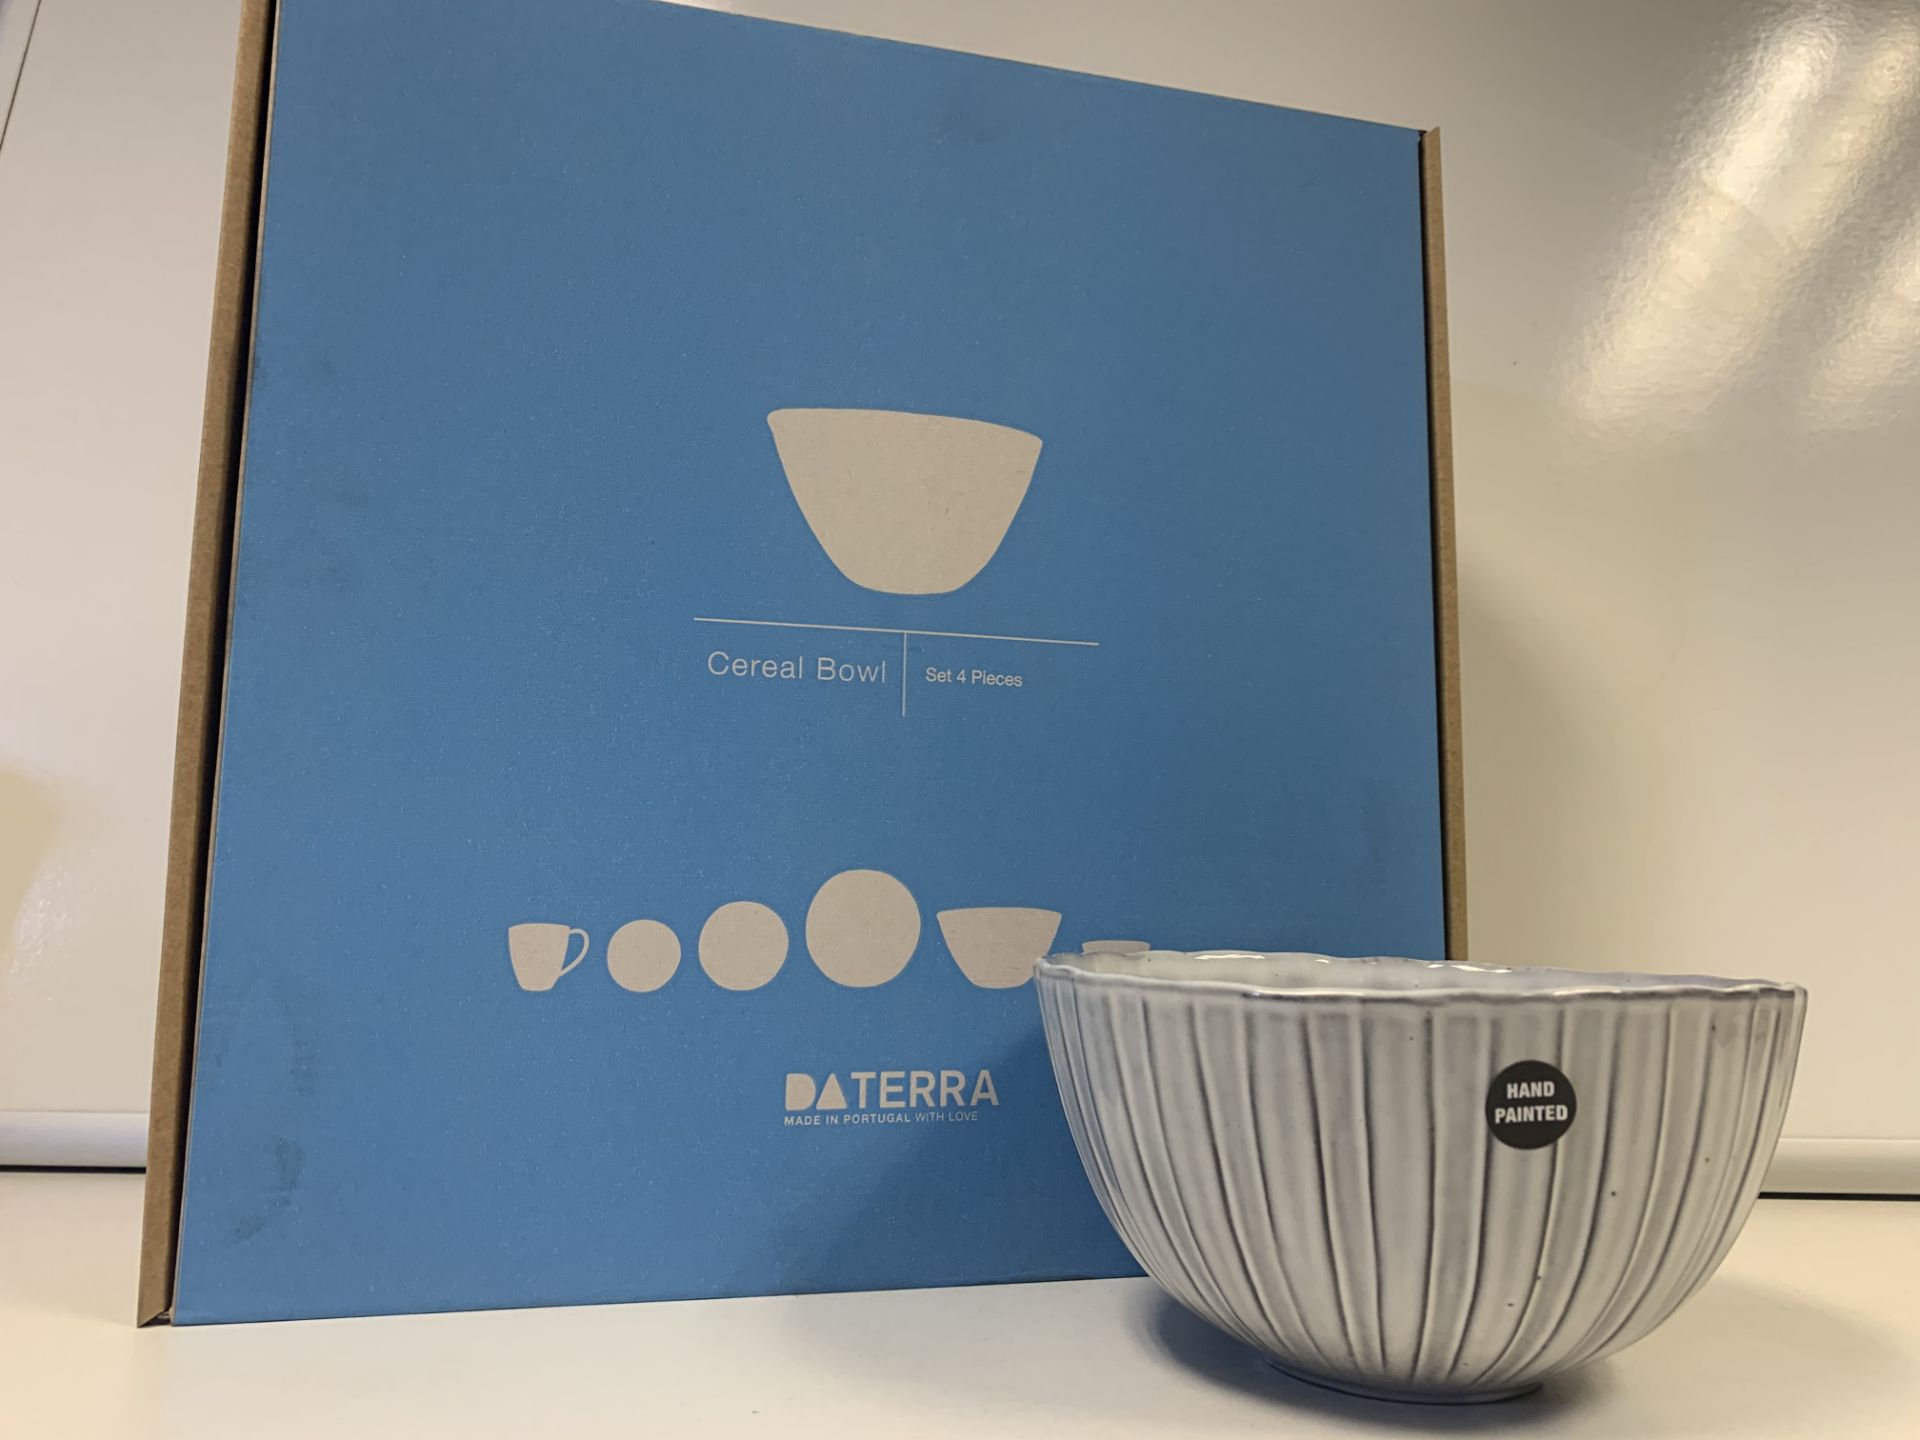 4 X BRAND NEW PACKS OF 4 RETAIL BOXED DA TERRA DOURO LAGRIMA CEREAL BOWLS RRP £100 PER PACK(HAND